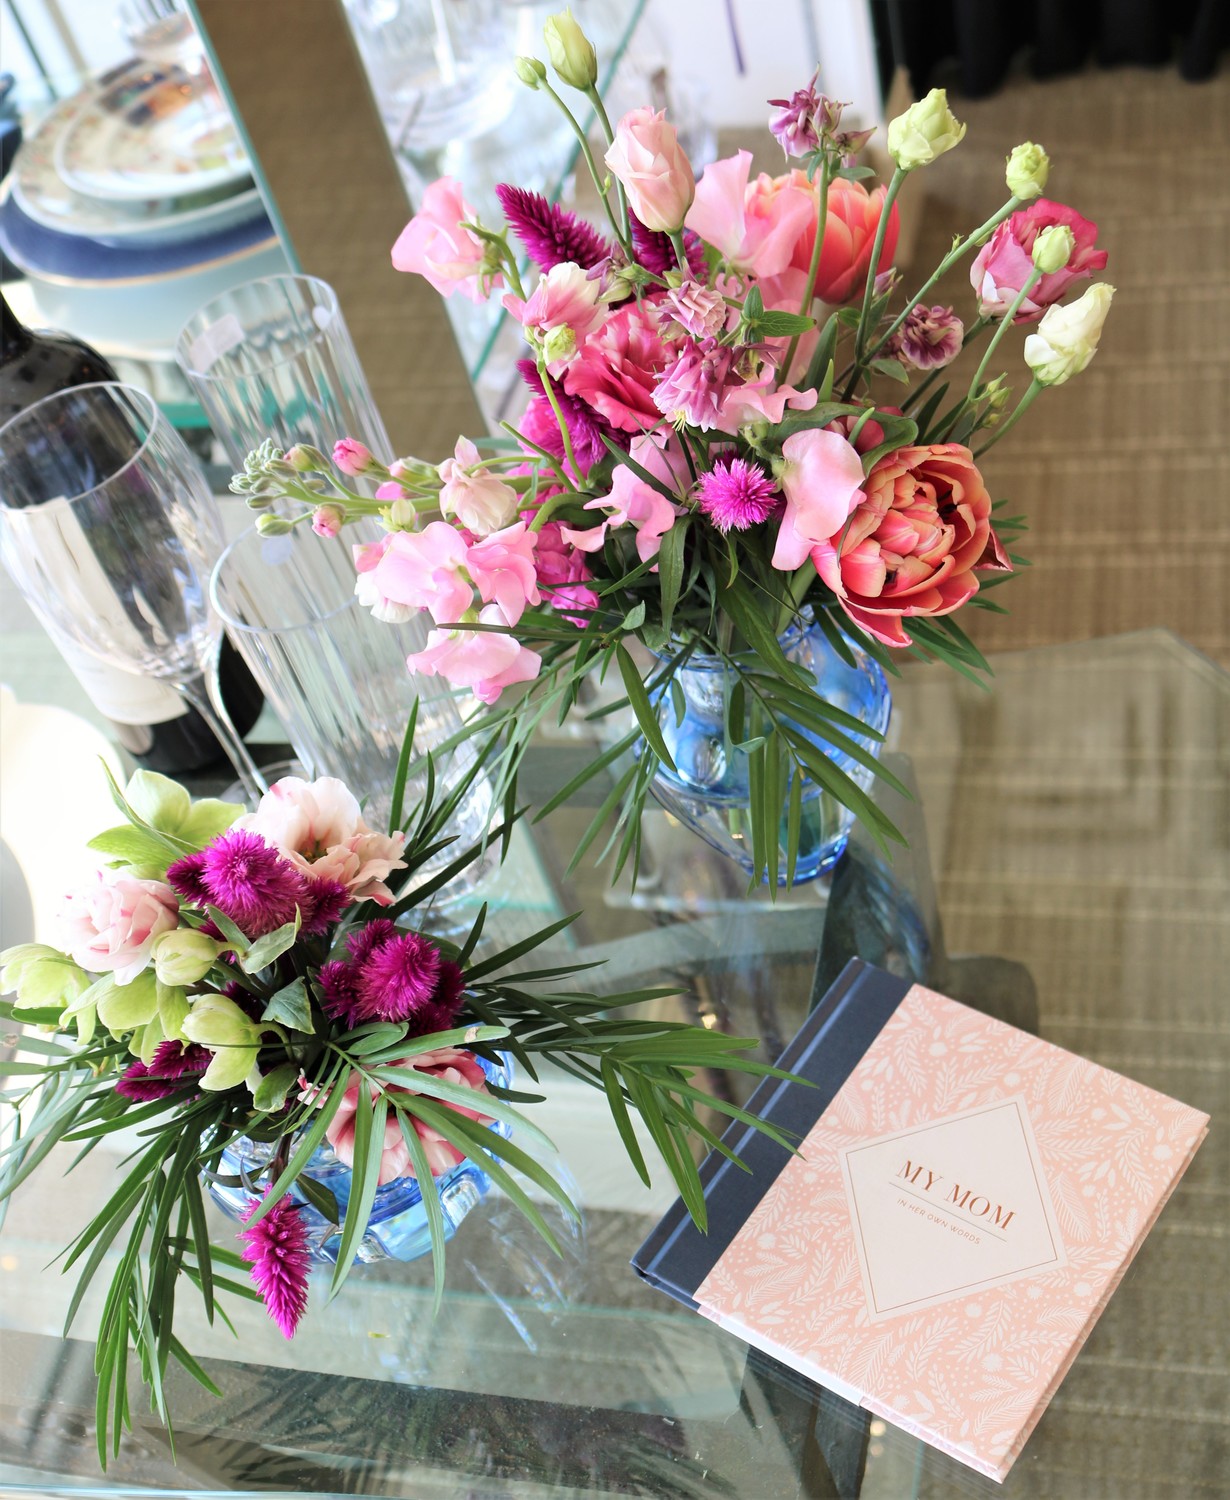 The event included a Mother’s Day-themed preview of the life-styling services of Centerpieces.